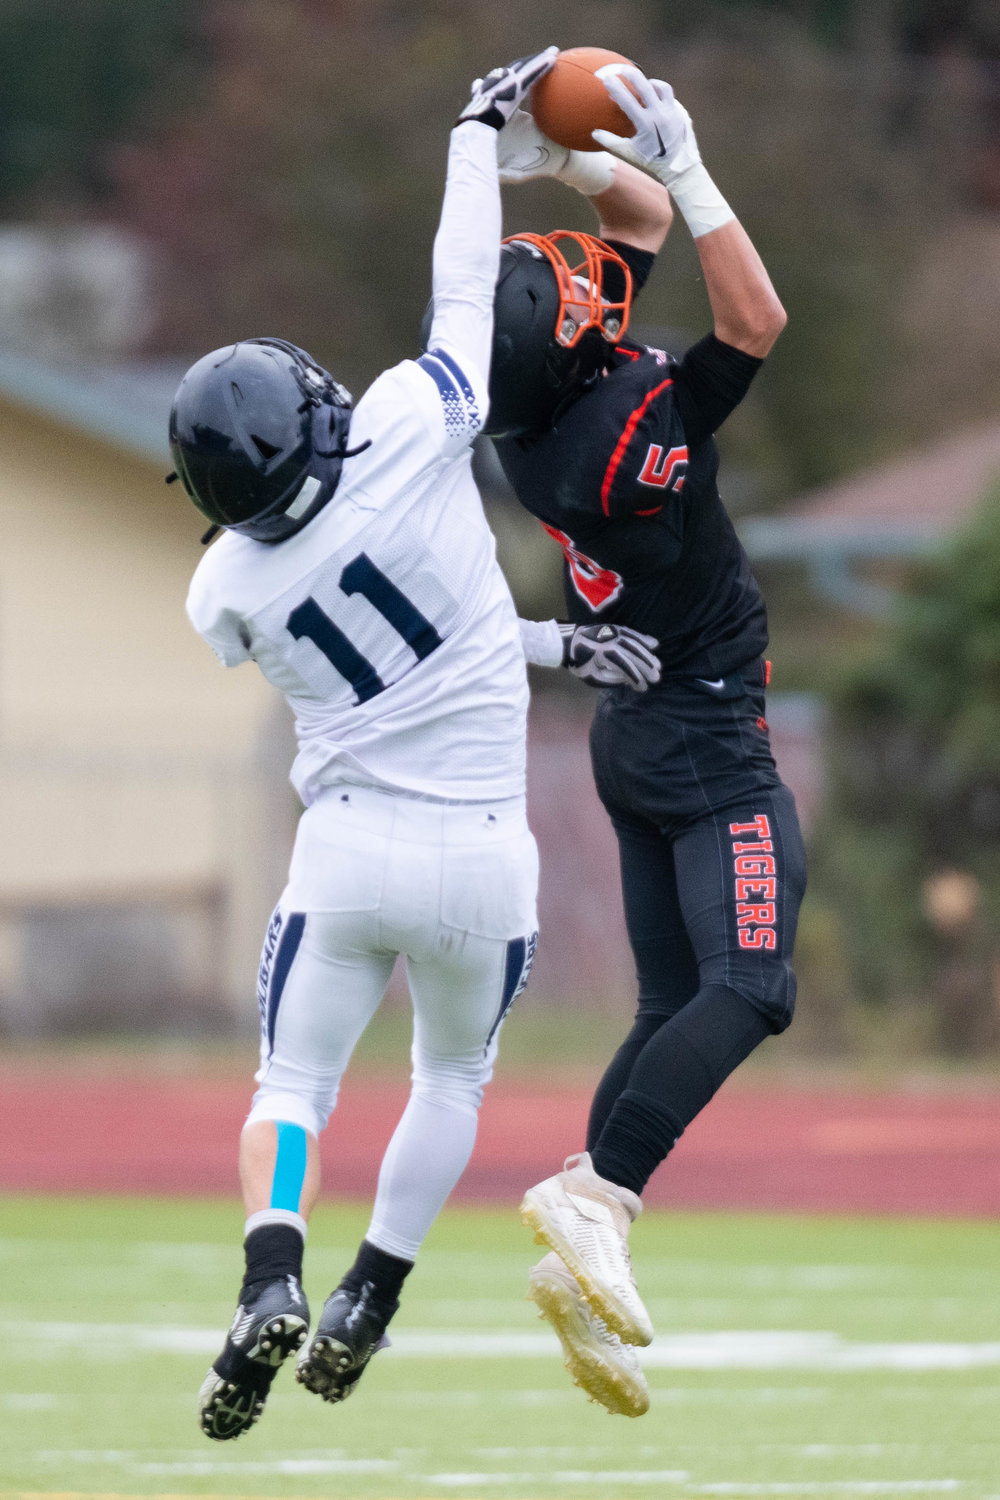 Karsen Denault out-jumps a Chewelah defender to come down with the ball during the second quarter of Napavine's 49-6 semifinal win over the Cougars on Nov. 26 in Tumwater.